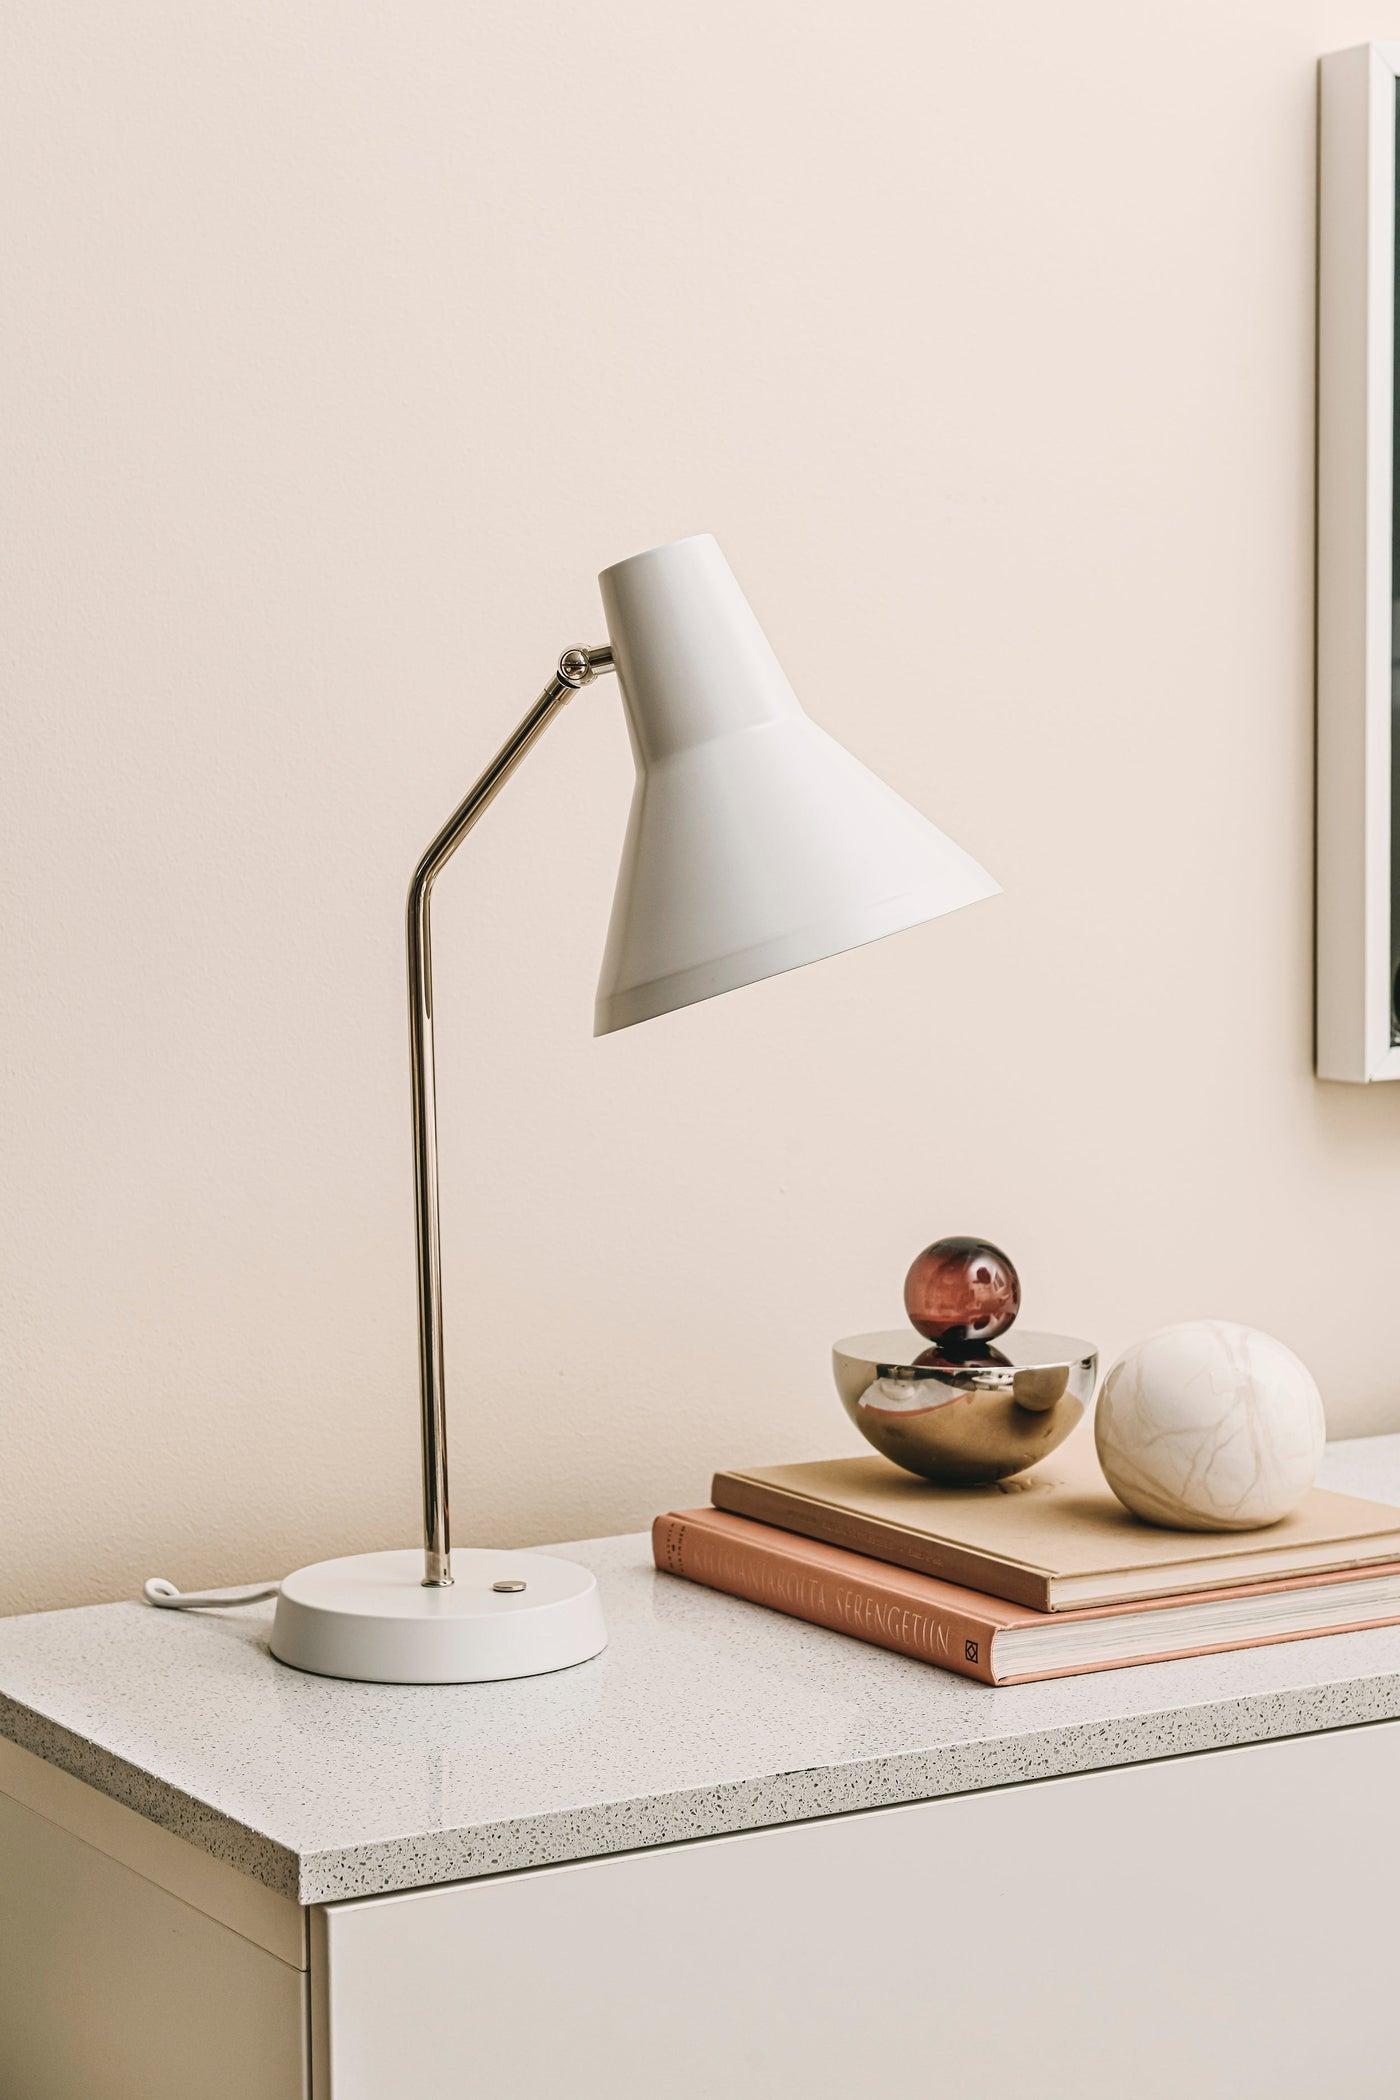 Lisa Johansson-Pape 'Carin' table lamp in polished chrome for Innolux. Innolux Carin is a new family of luminaires with a sophisticated look sealed by a brass or chrome arm. The beautiful metal dome is easy to direct and the practical touch switch